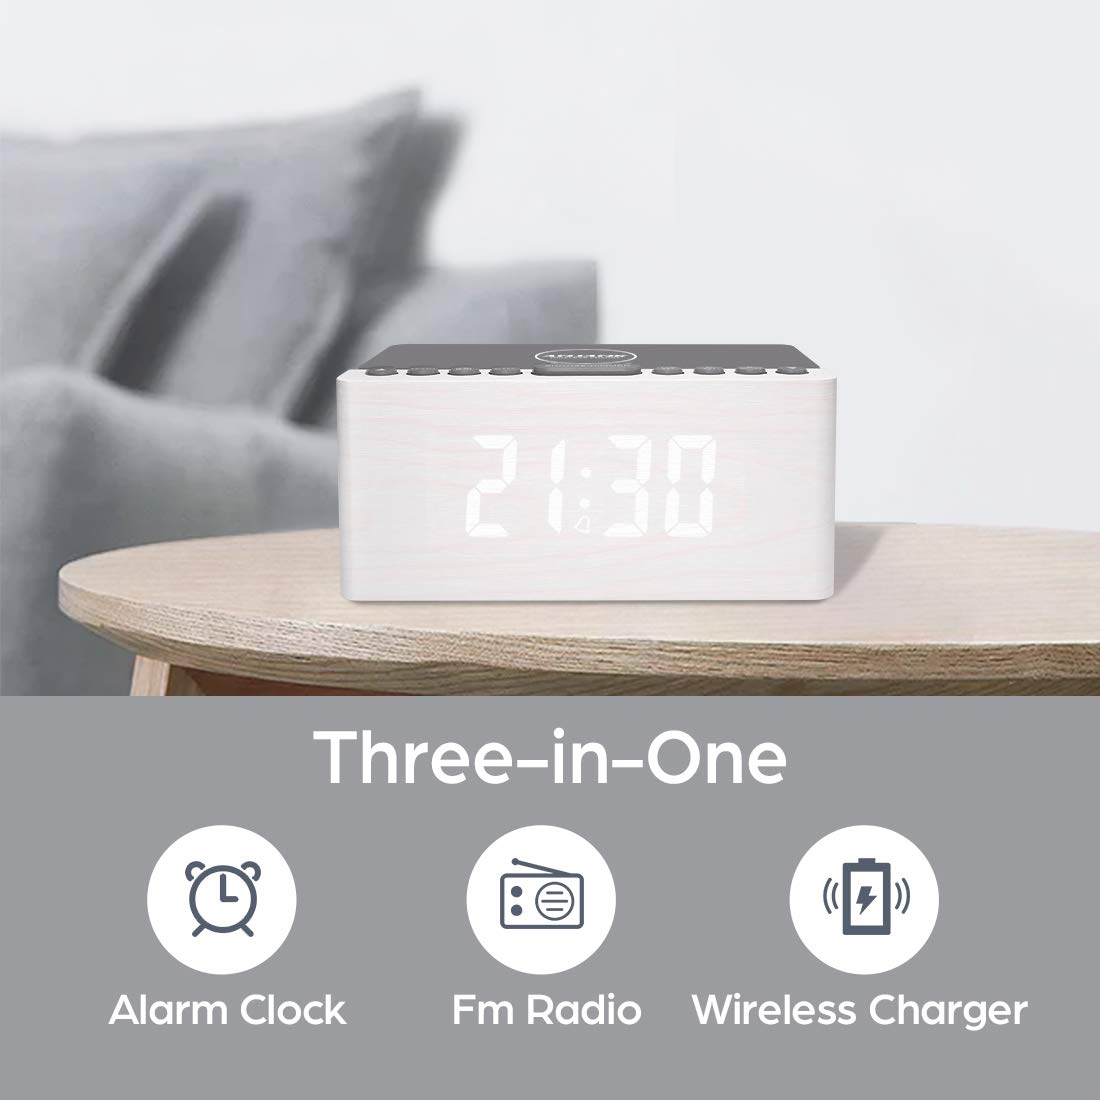 ANJANK Wooden Digital Alarm Clock FM Radio, 10W Fast Wireless Charger Station for iPhone/Samsung Galaxy, 5 Level Dimmer, USB Charging Port, 2 Wake up Sounds, Bedrooms Sleep Timer, Wood LED Clock